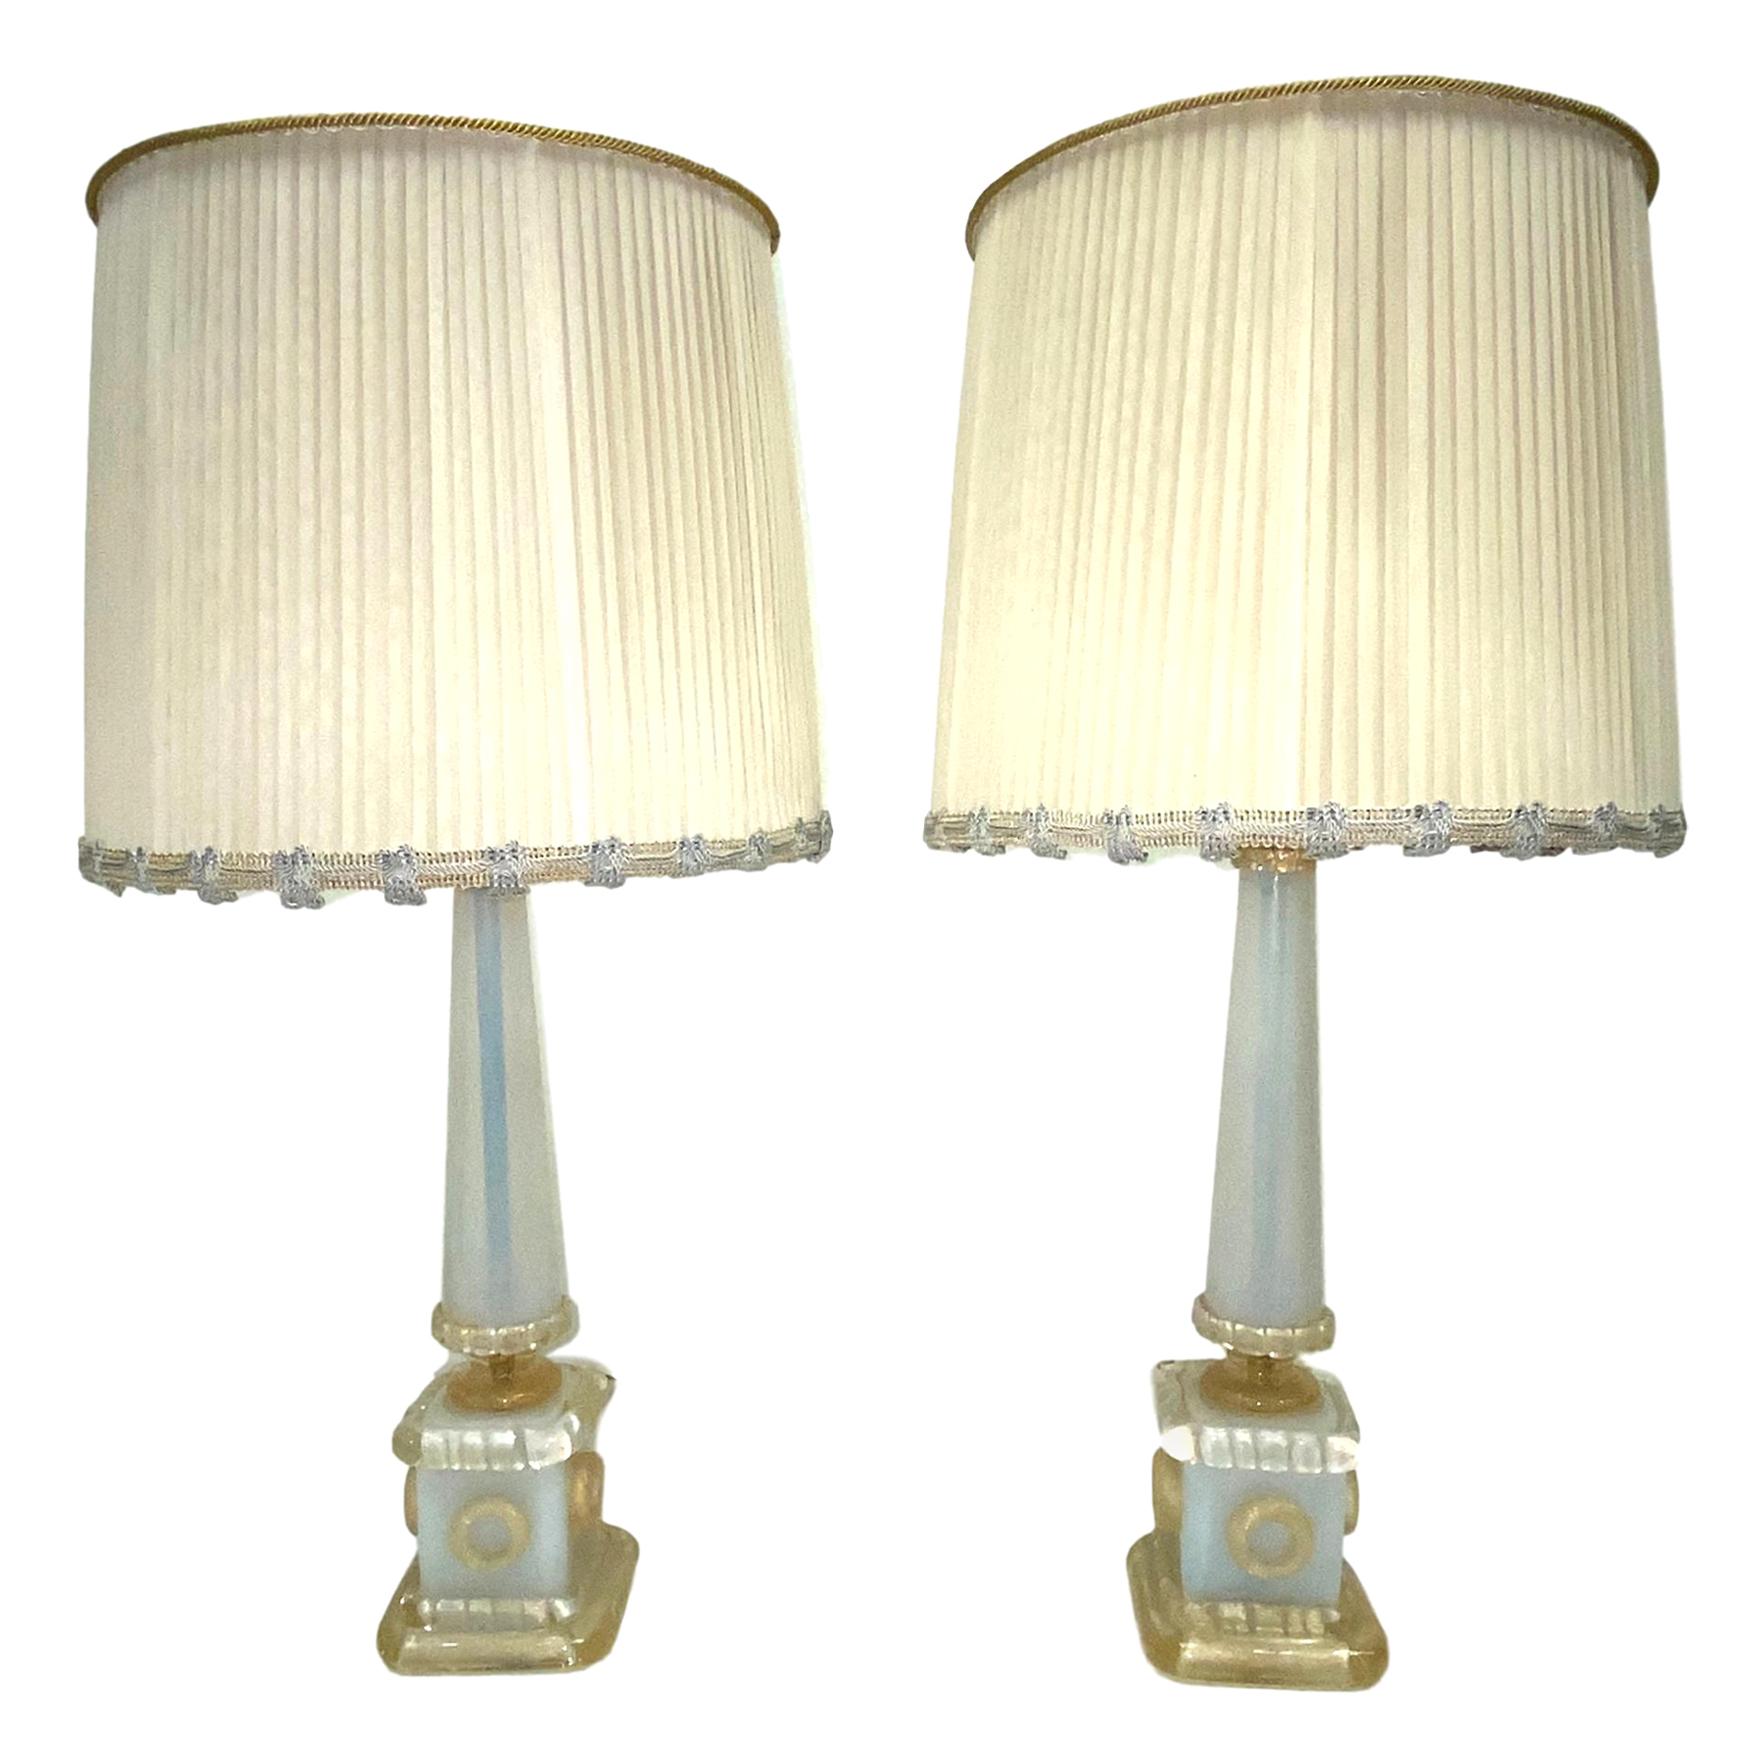 Barovier Toso Neoclassic Obelisk Iridize & Gold Infused Murano Glass Table Lamps For Sale